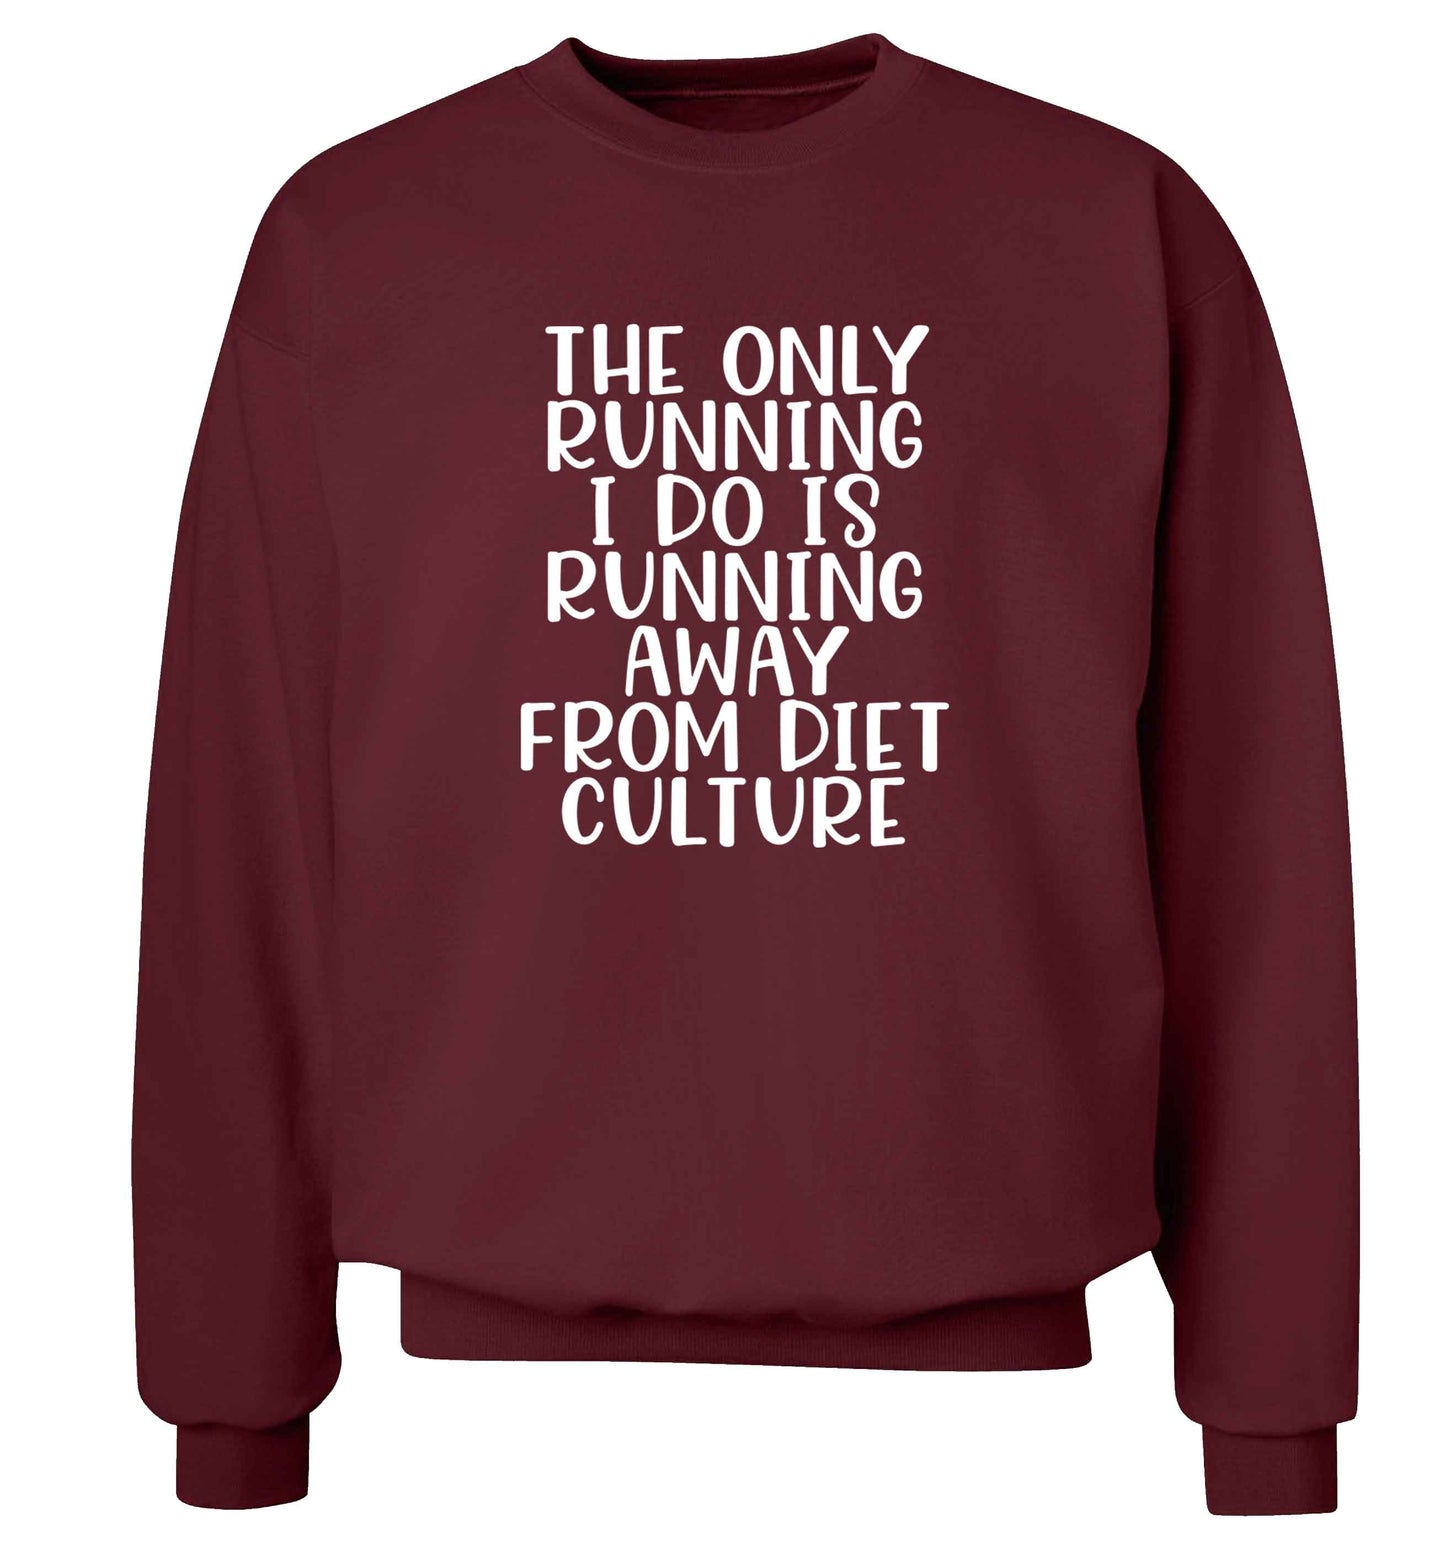 The only running I do is running away from diet culture adult's unisex maroon sweater 2XL